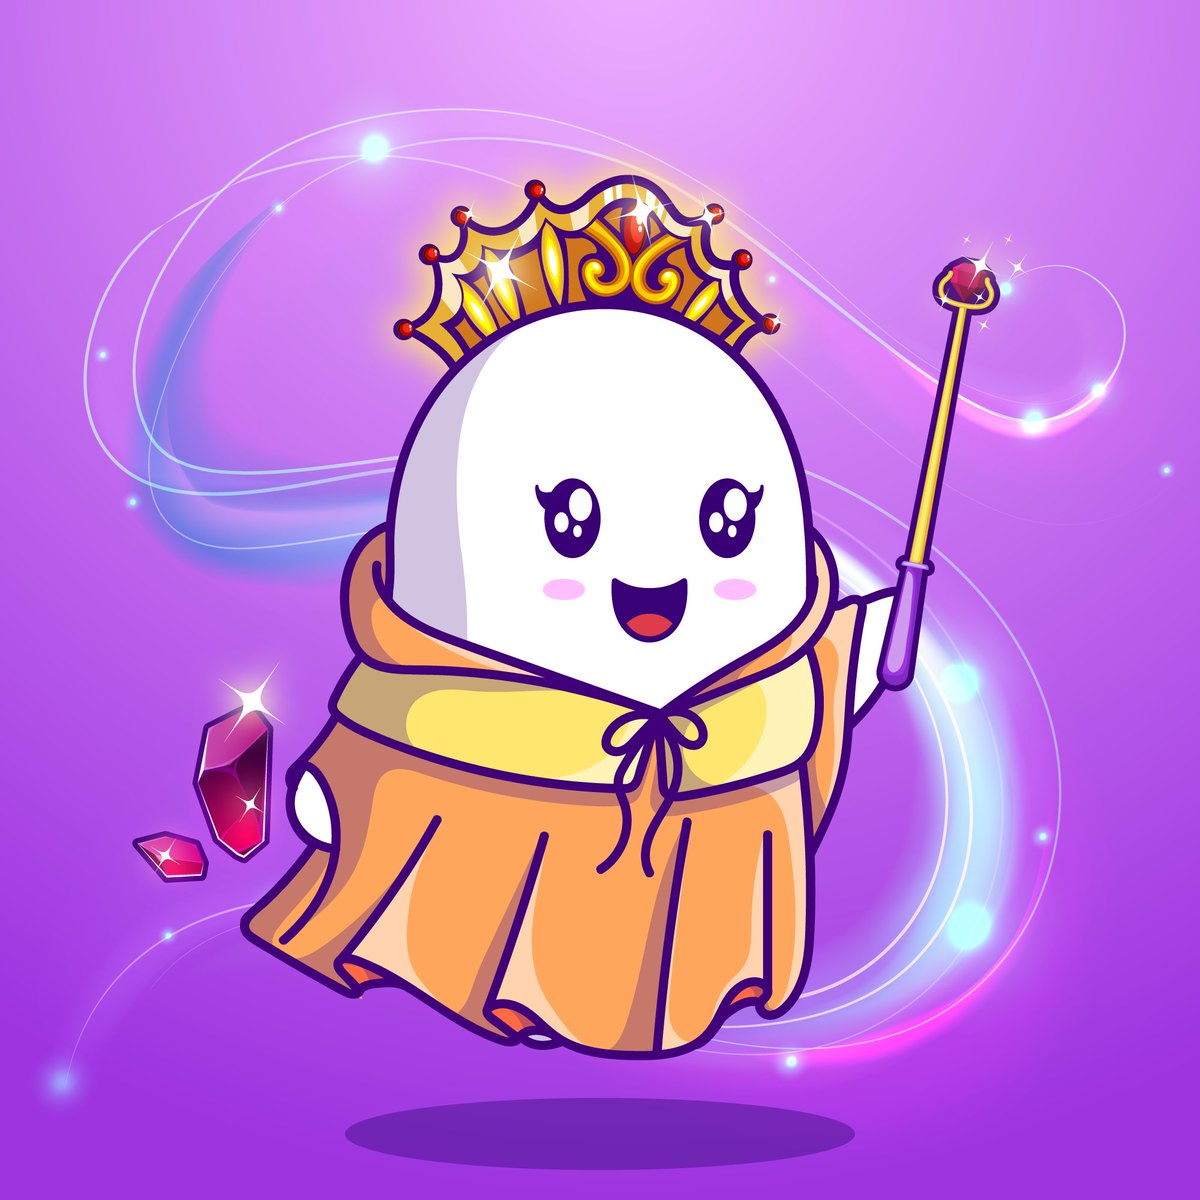 Ghost Buddy is about having fun and enjoying cute art! #ghostbuddy #cuteart #minting #solana